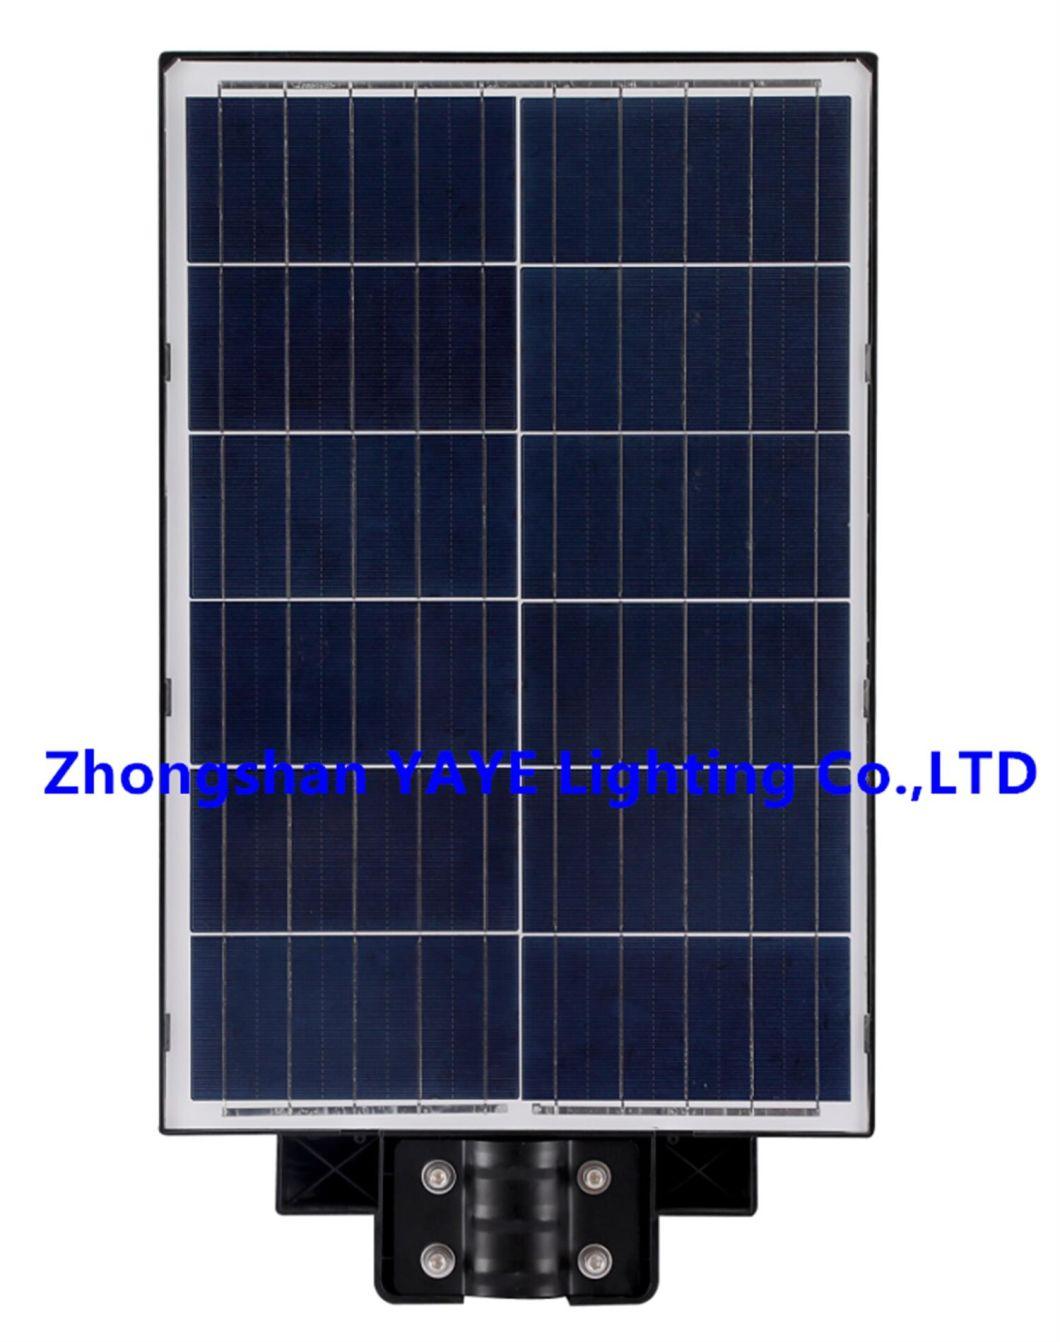 Yaye 2022 Hottest Sell Outdoor IP67 Waterproof LED Integrated 200W /300W/400W Motion Sensor All in One Solar Street Lighting with 1000PCS Stock